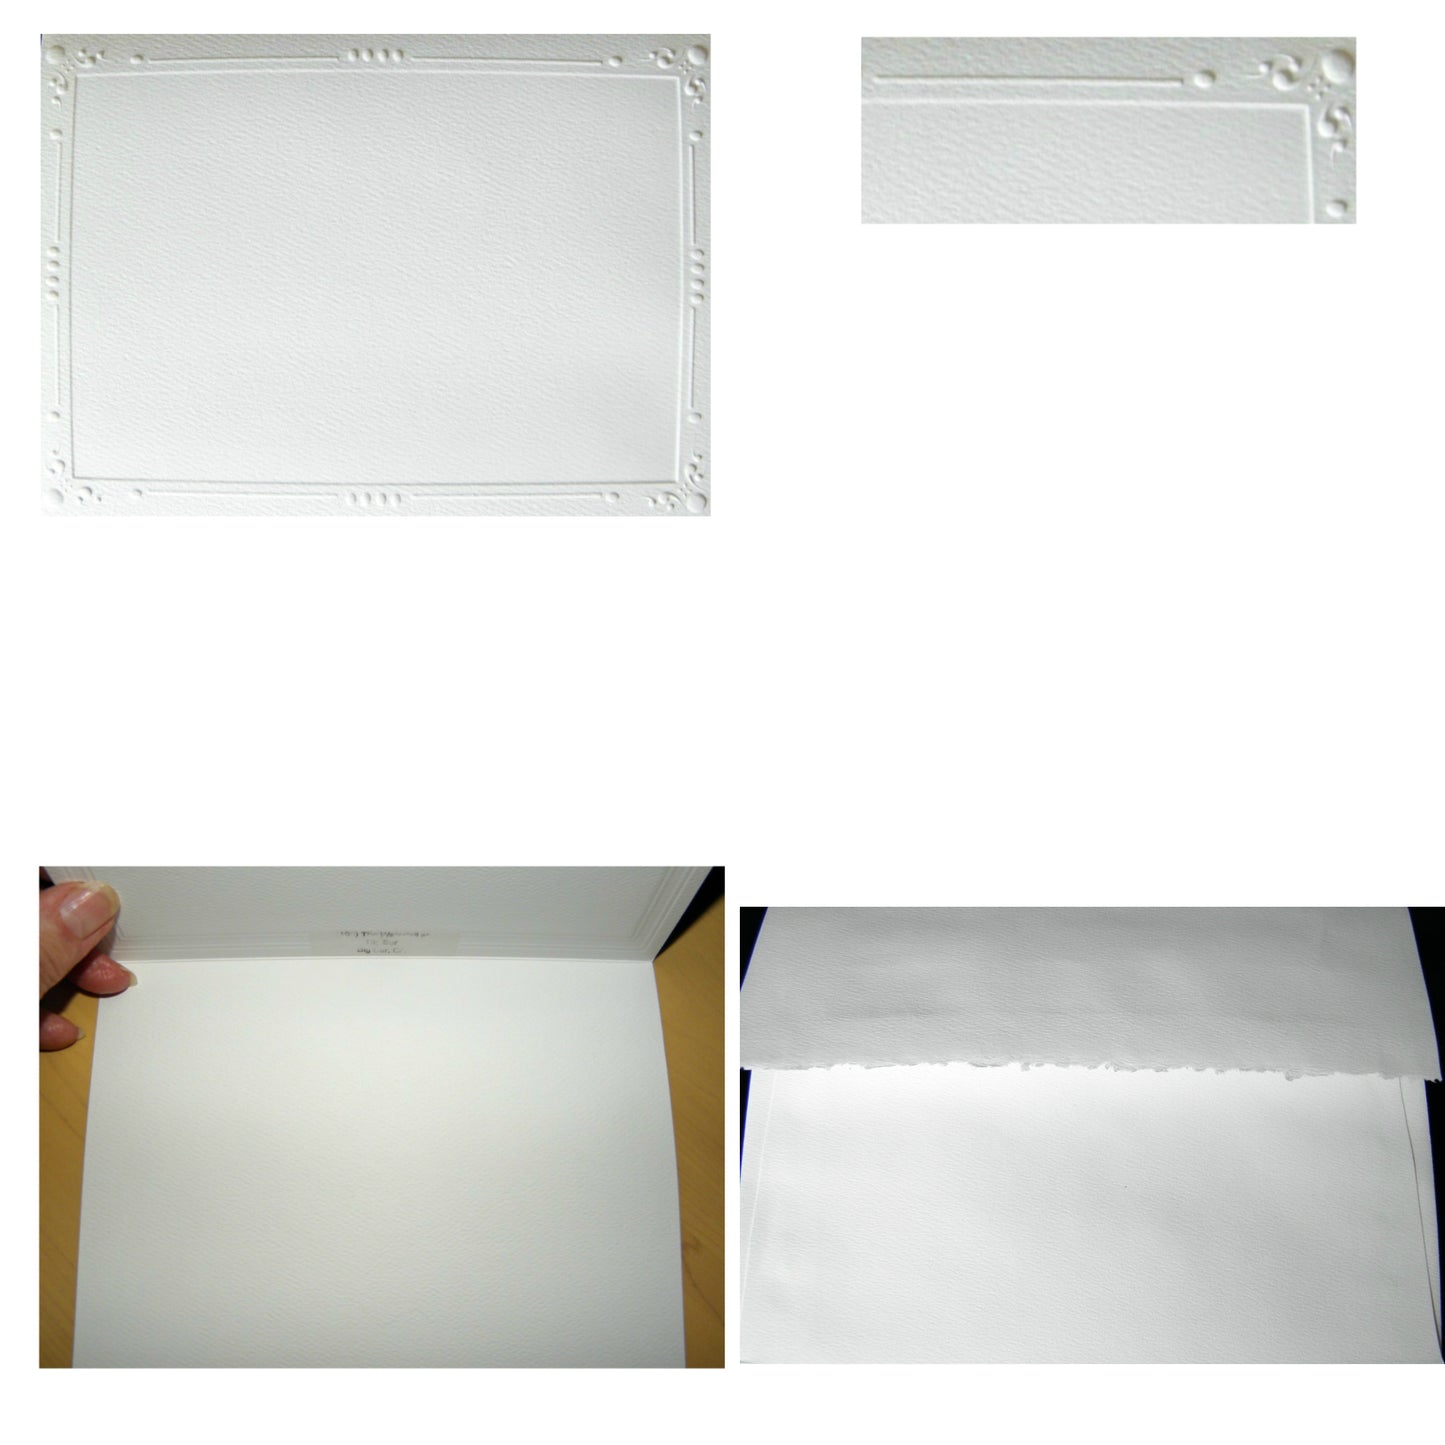 Photo of the Decorative card stock and decorative envelope